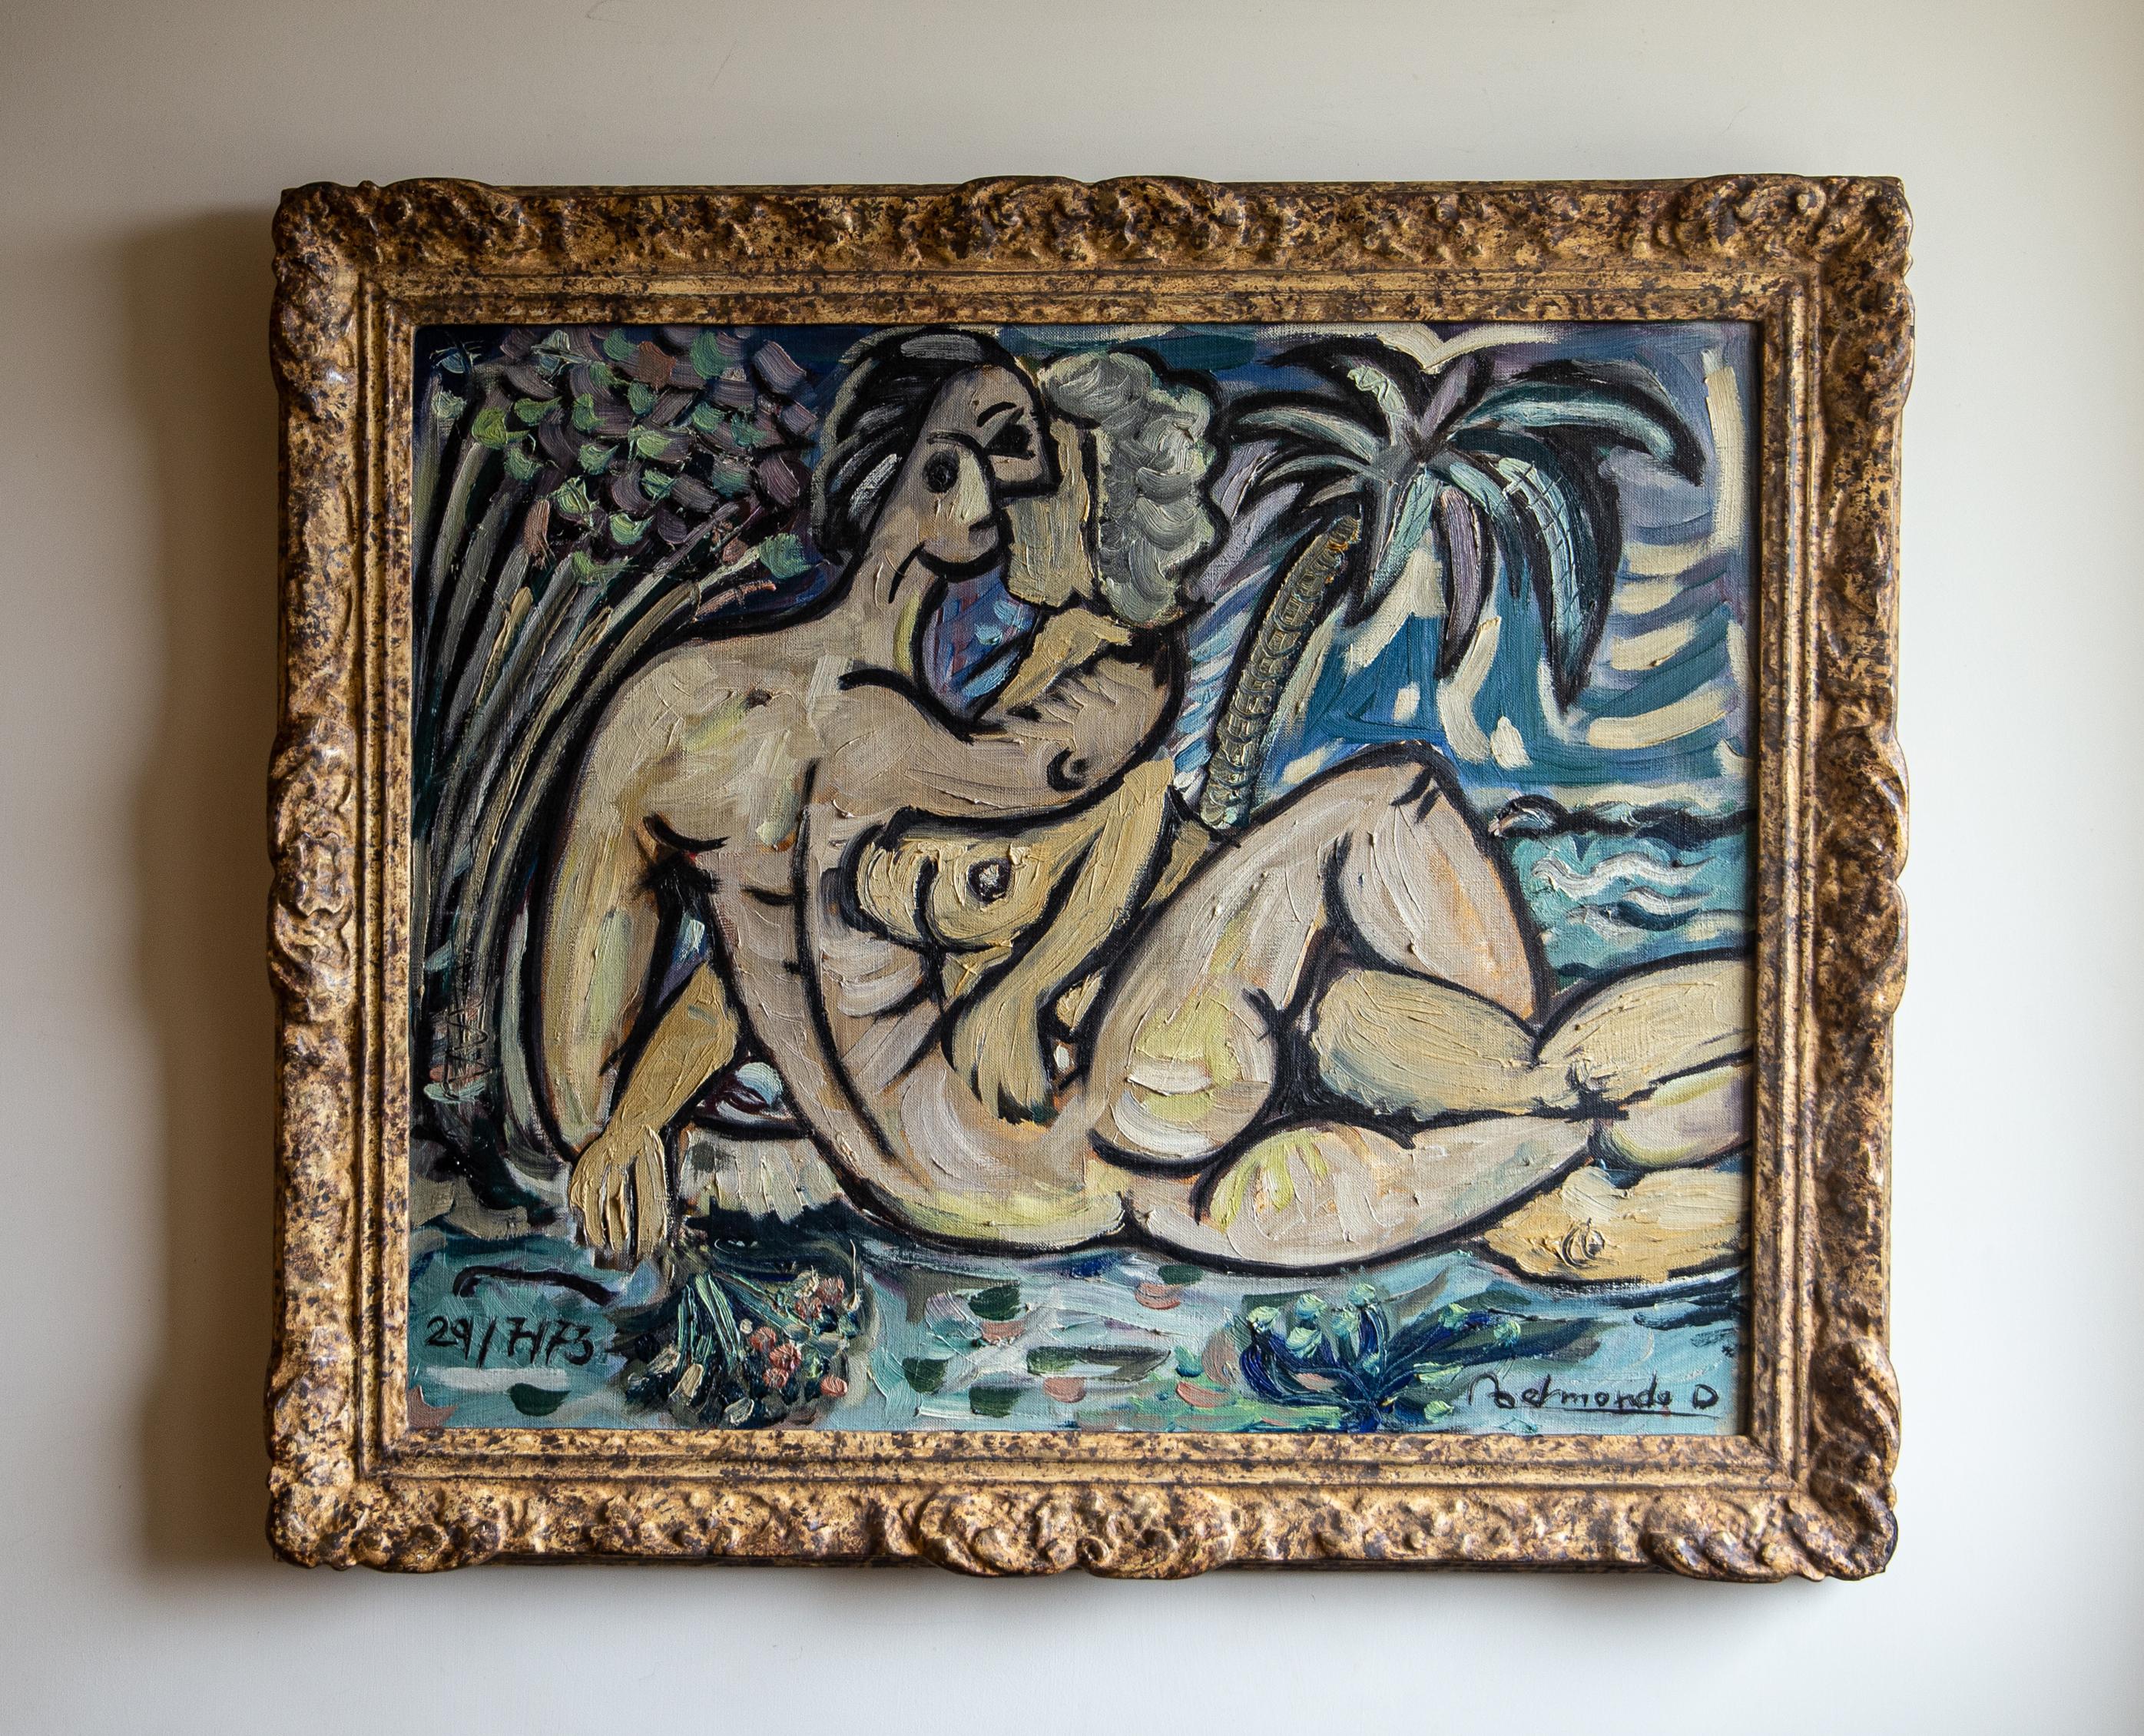 A charming cubist figurative composition of two lovers embraced. Thickly applied paint and strong textural application with vibrant long brush movement lend a fluidity with a highly expressionistic style. Dated 29/7/73 and signed ‘Belmondo’. Mounted